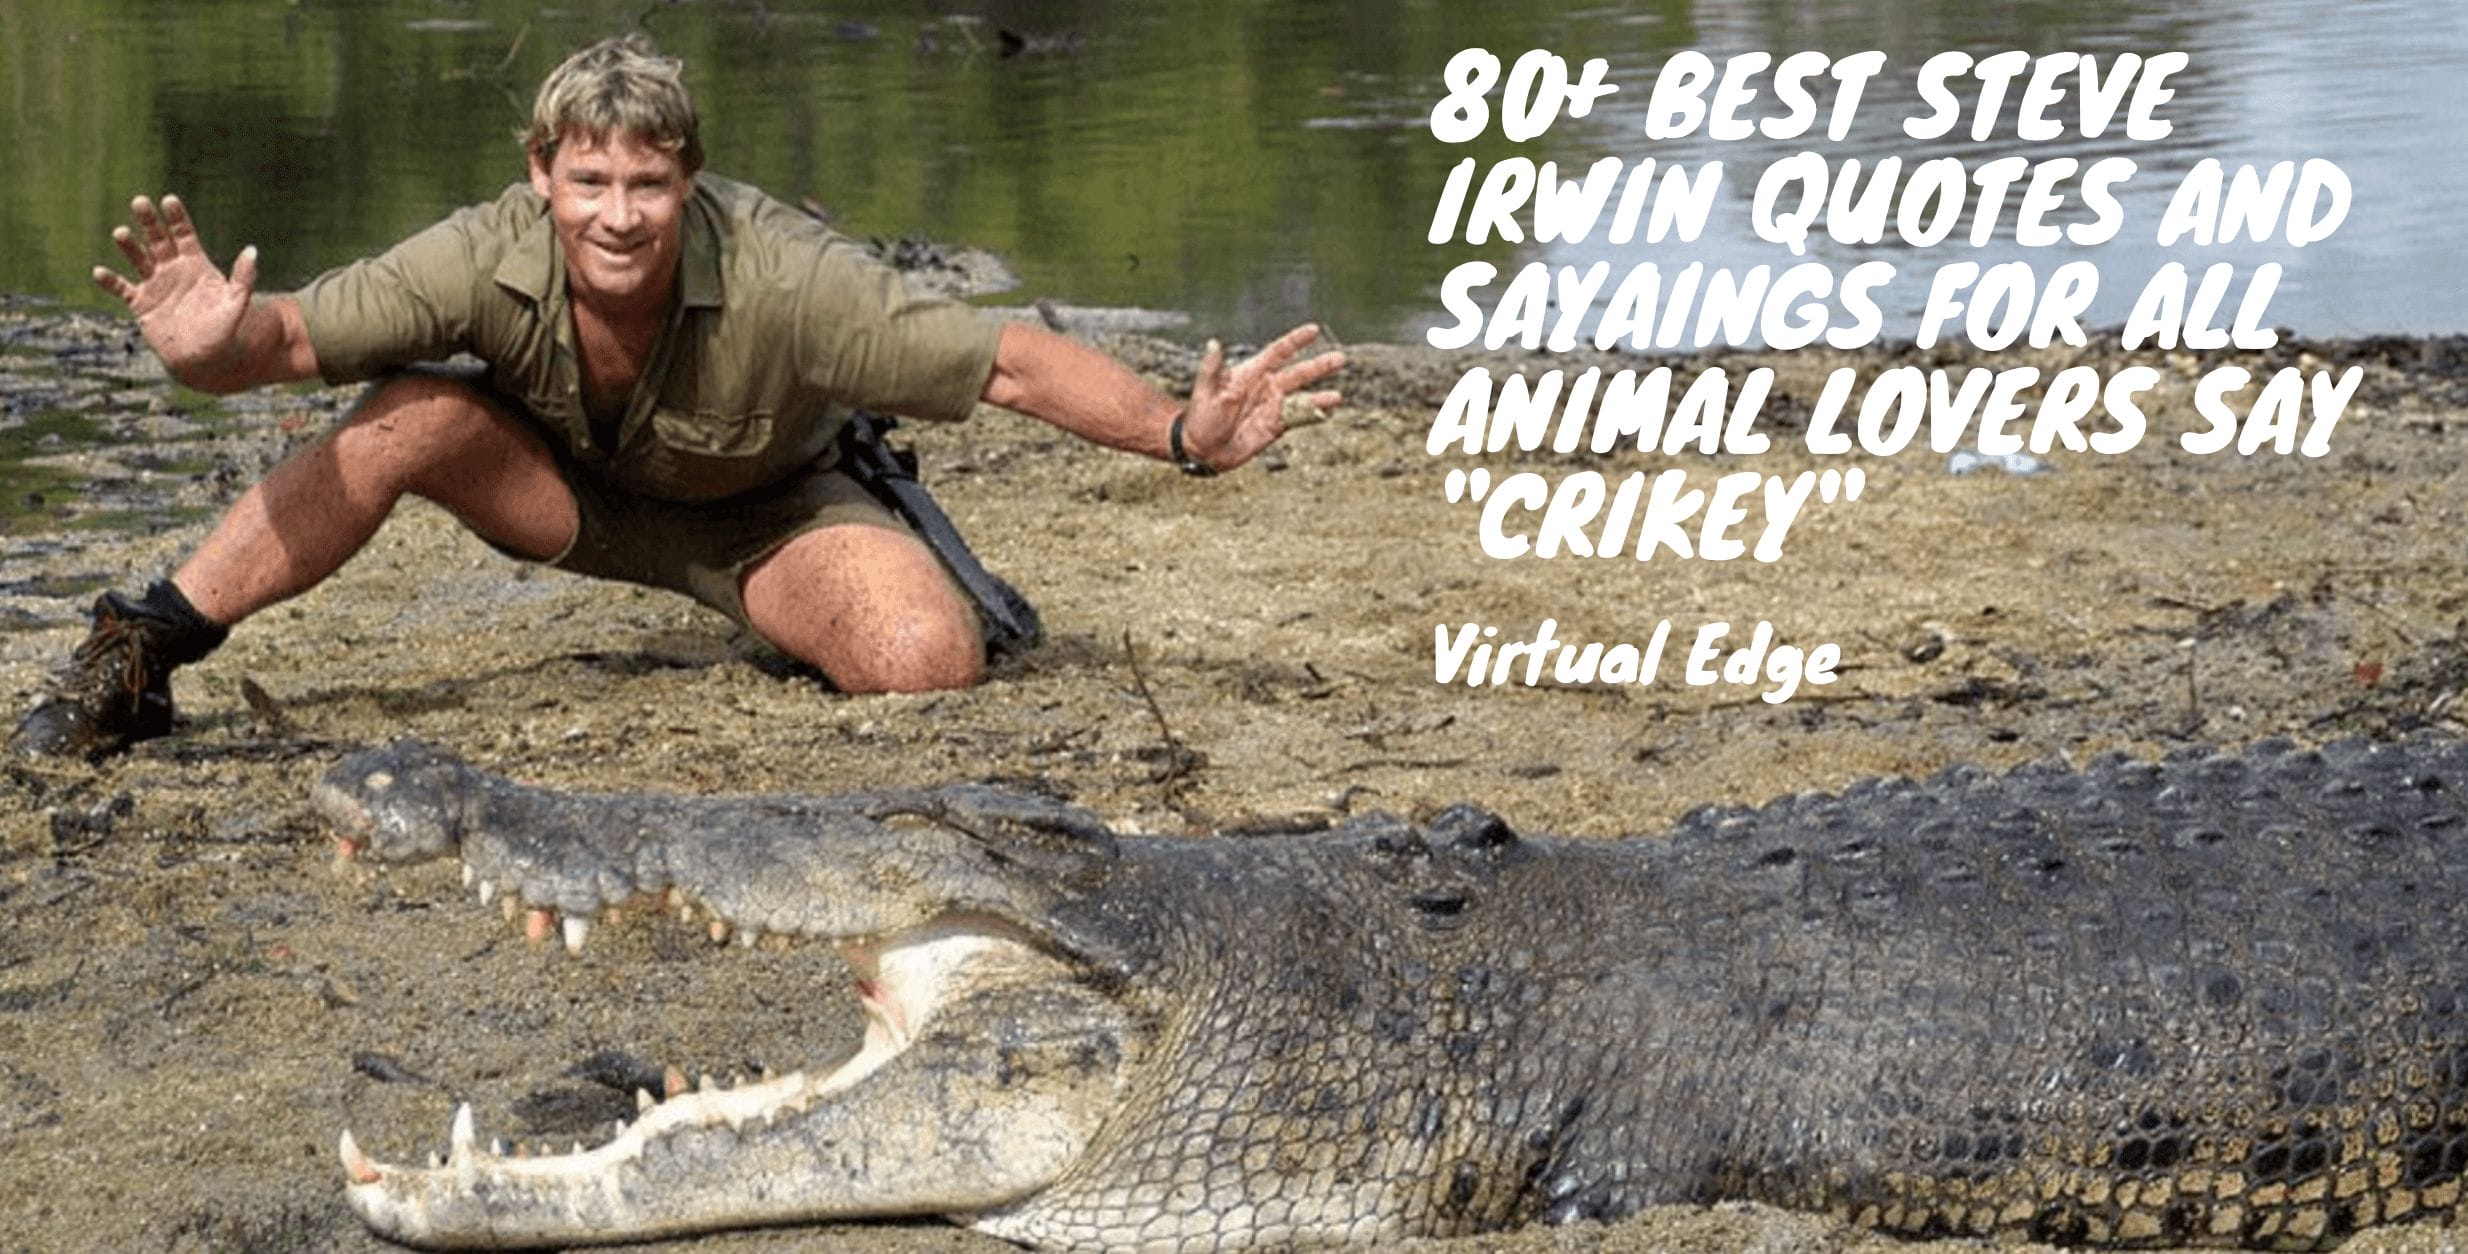 80+ Best Steve Irwin Quotes and Sayaings for All Animal Lovers Say "Crikey"